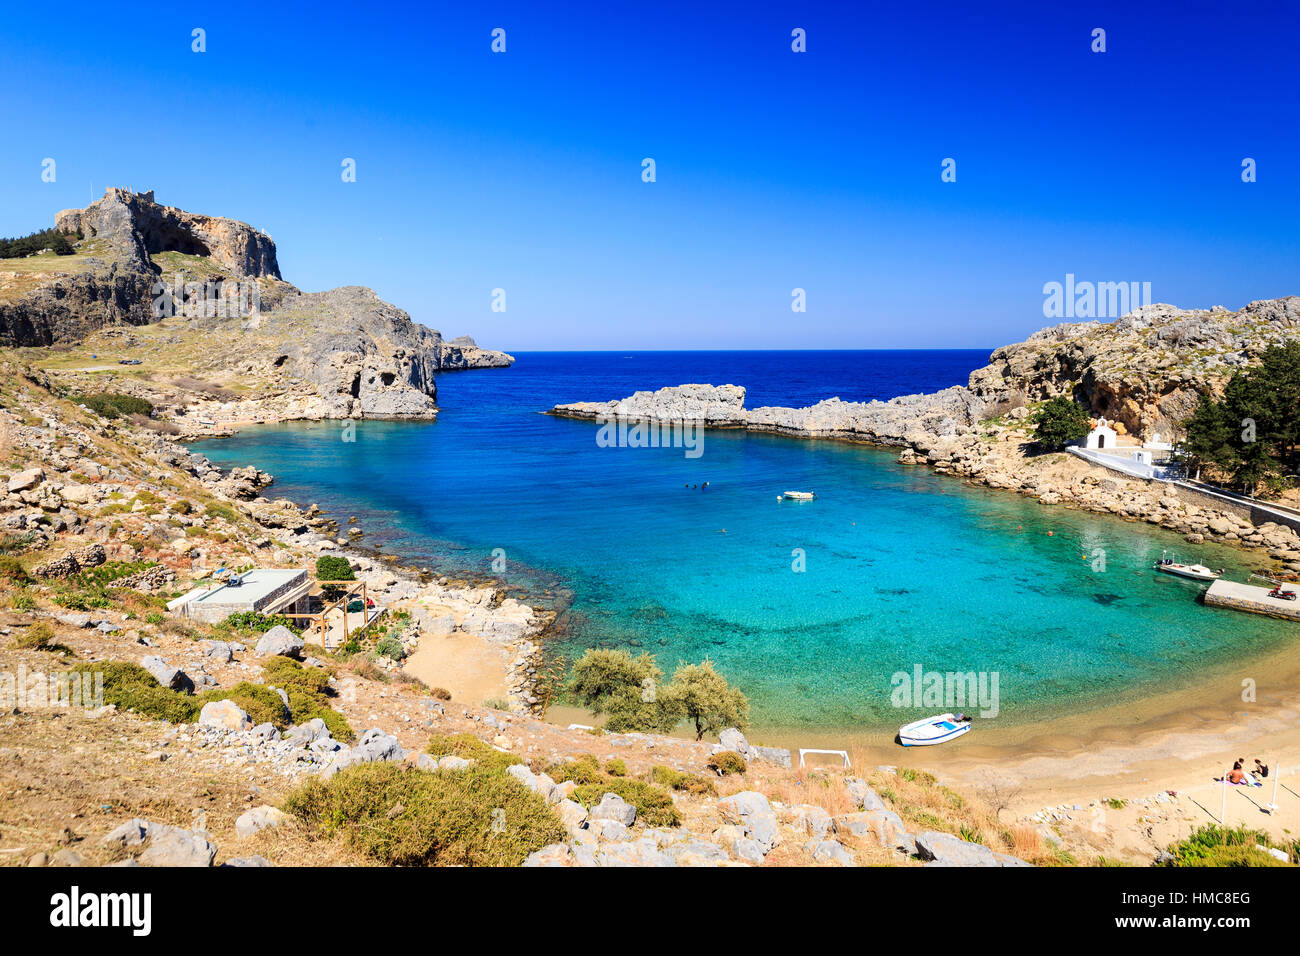 St Pauls Bay and Beach with Lindos Acropolis in the background, rhodes, greece Stock Photo